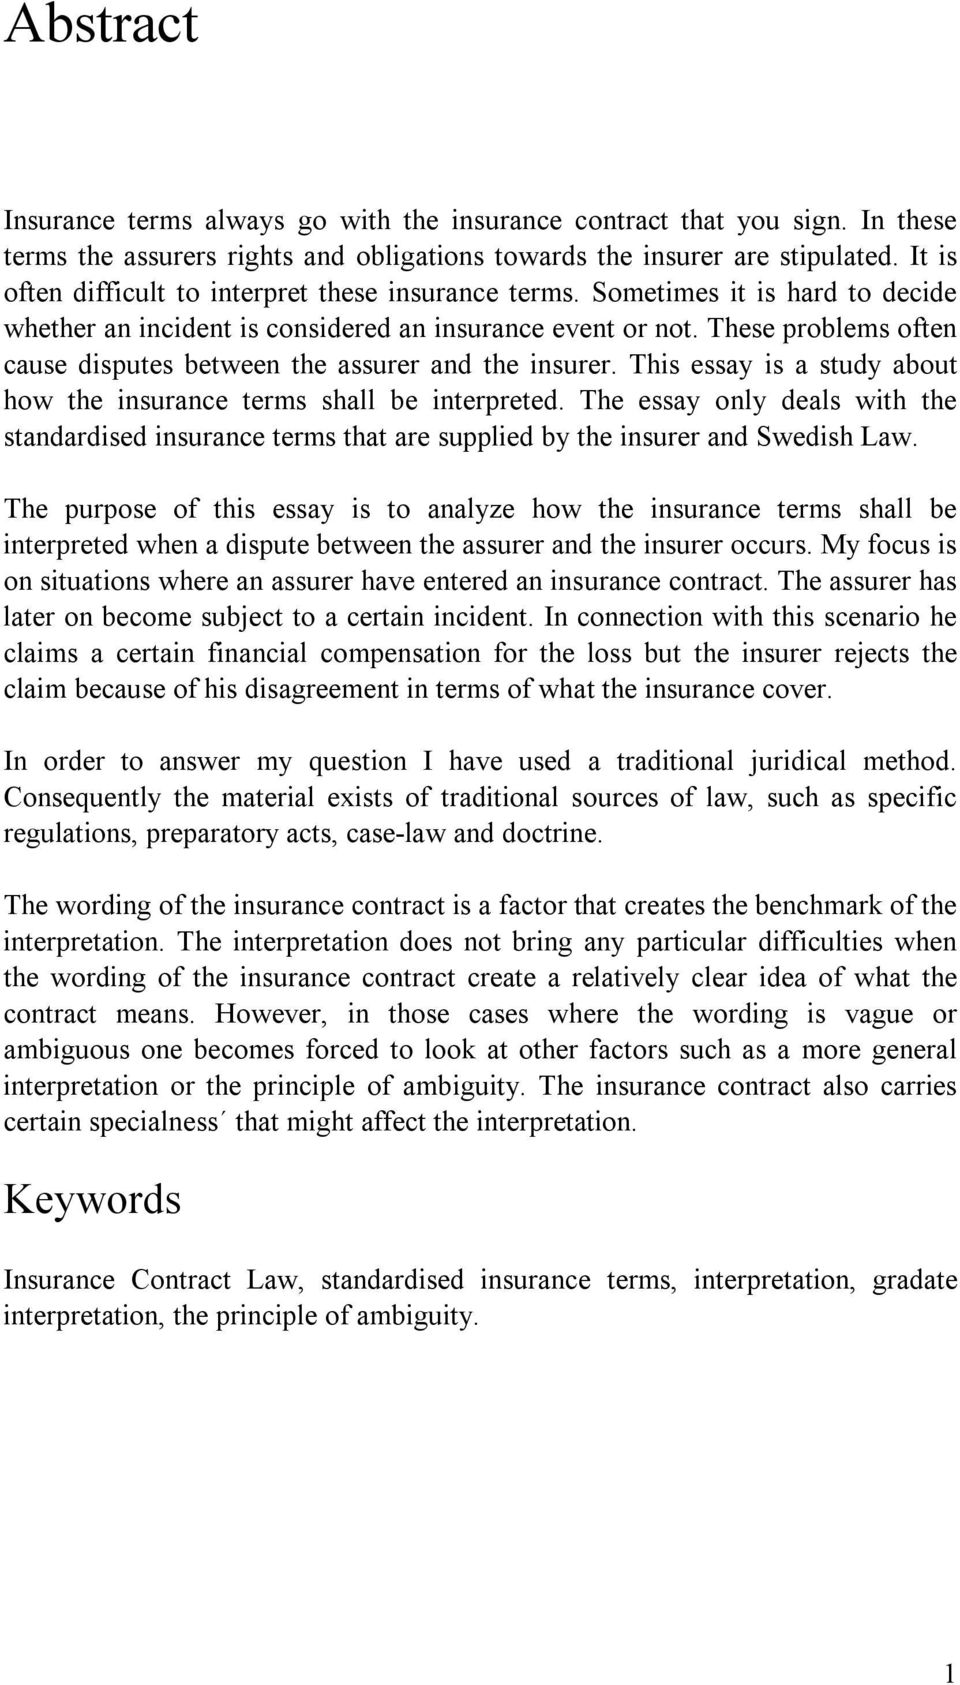 These problems often cause disputes between the assurer and the insurer. This essay is a study about how the insurance terms shall be interpreted.